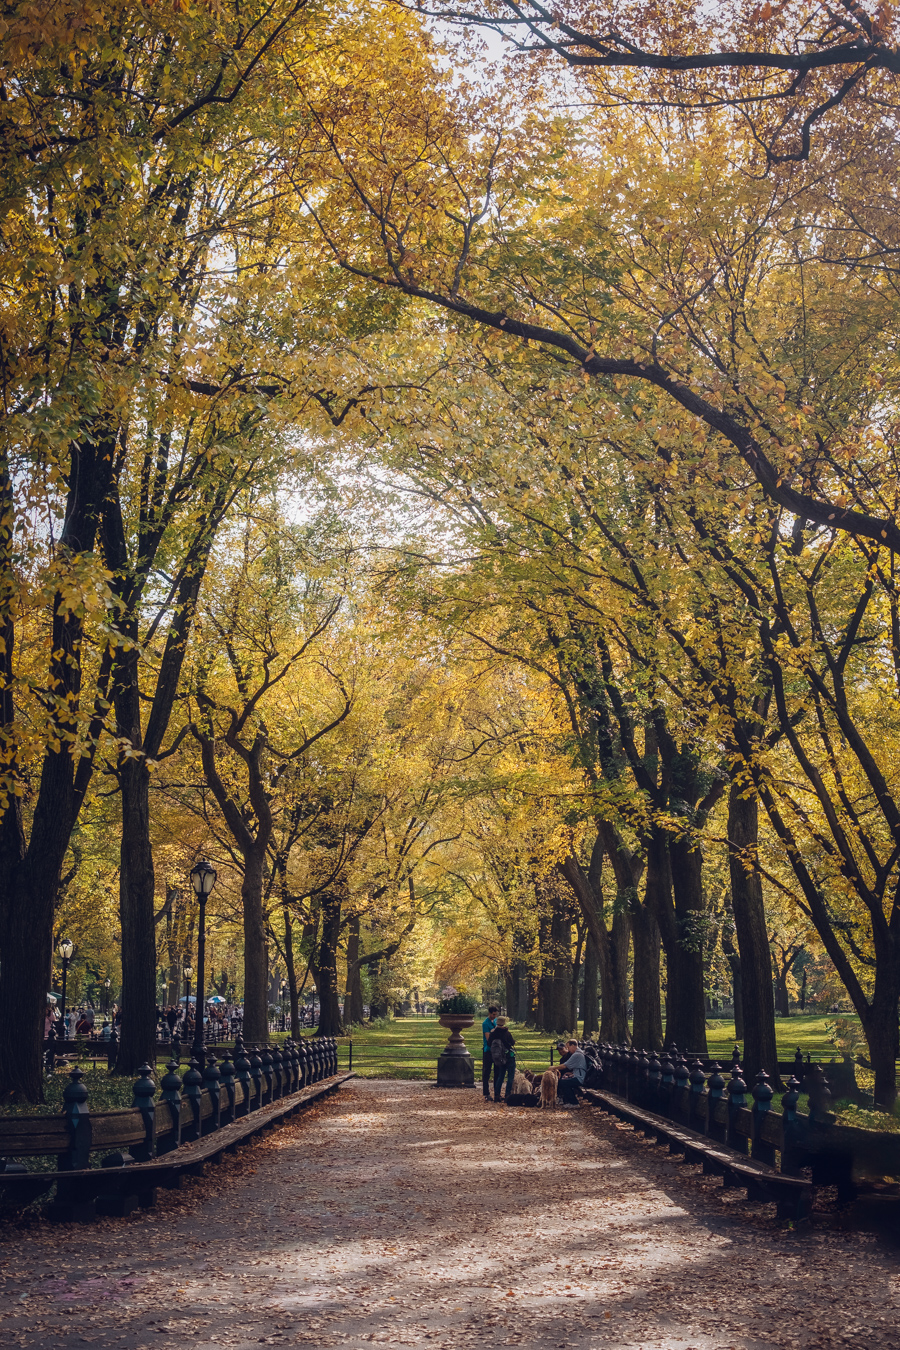 Photograph of Central Park in Autumn, New York by Alex Nichol